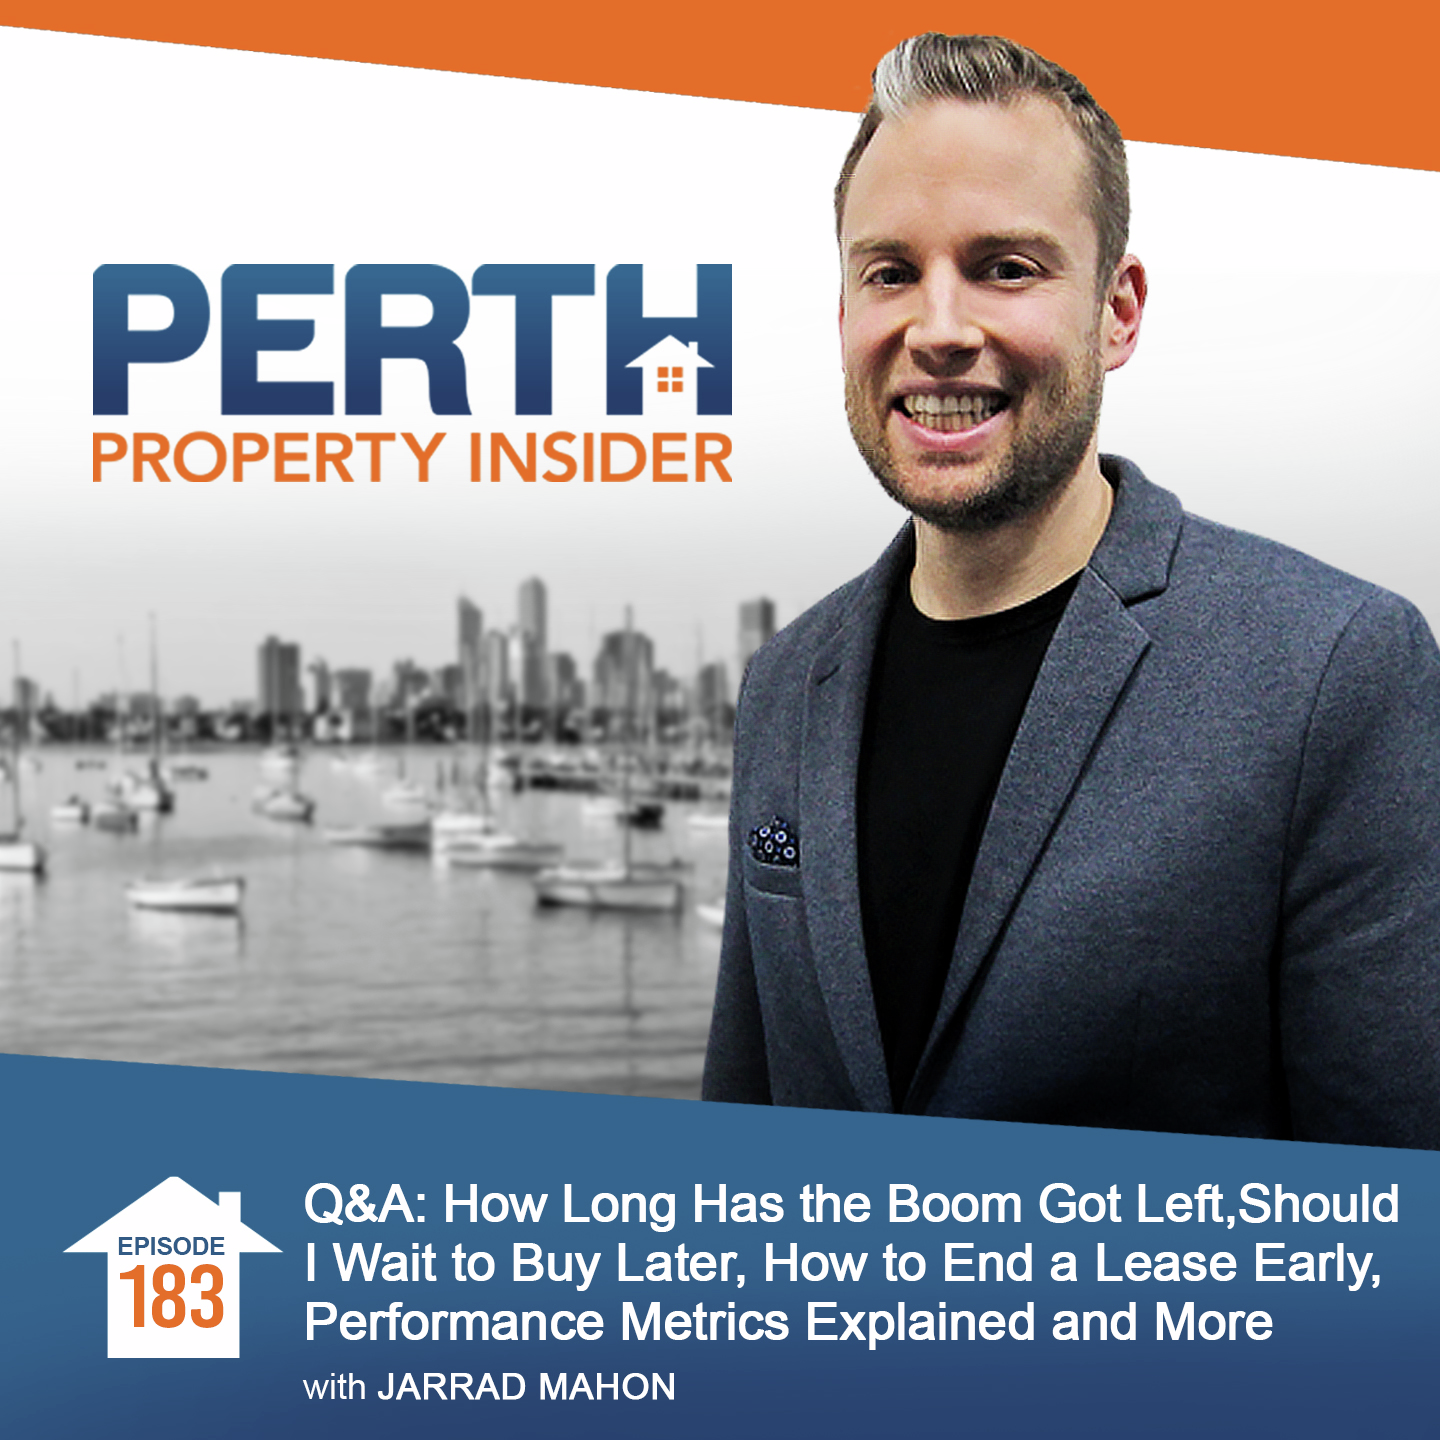 Q&A: How Long Has the Boom Got Left, Should I Wait to Buy Later, How to End a Lease Early, Performance Metrics Explained and More